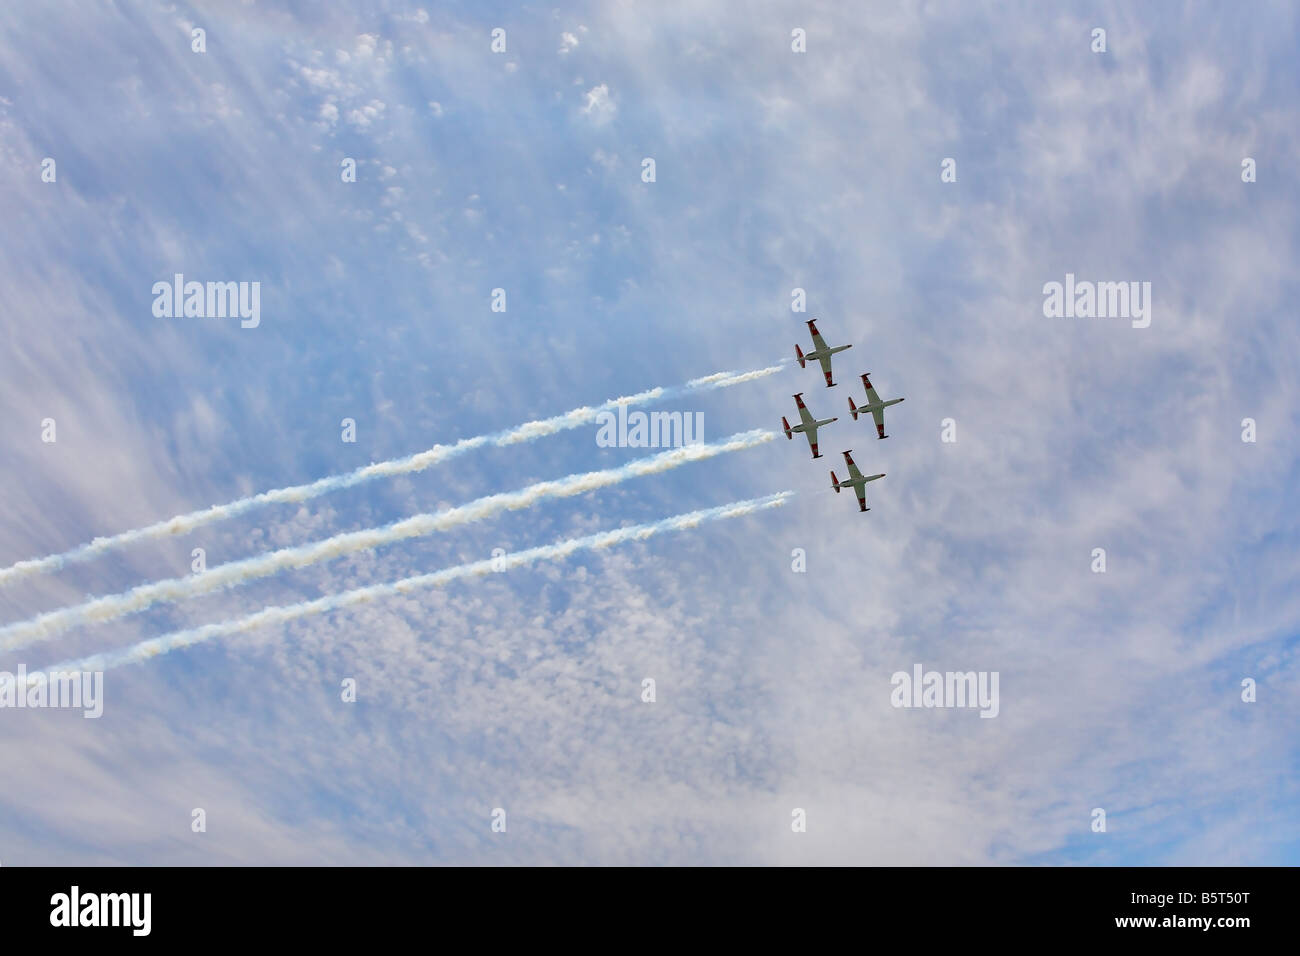 Four magnificent planes on air parade show art of synchronous flight Stock Photo